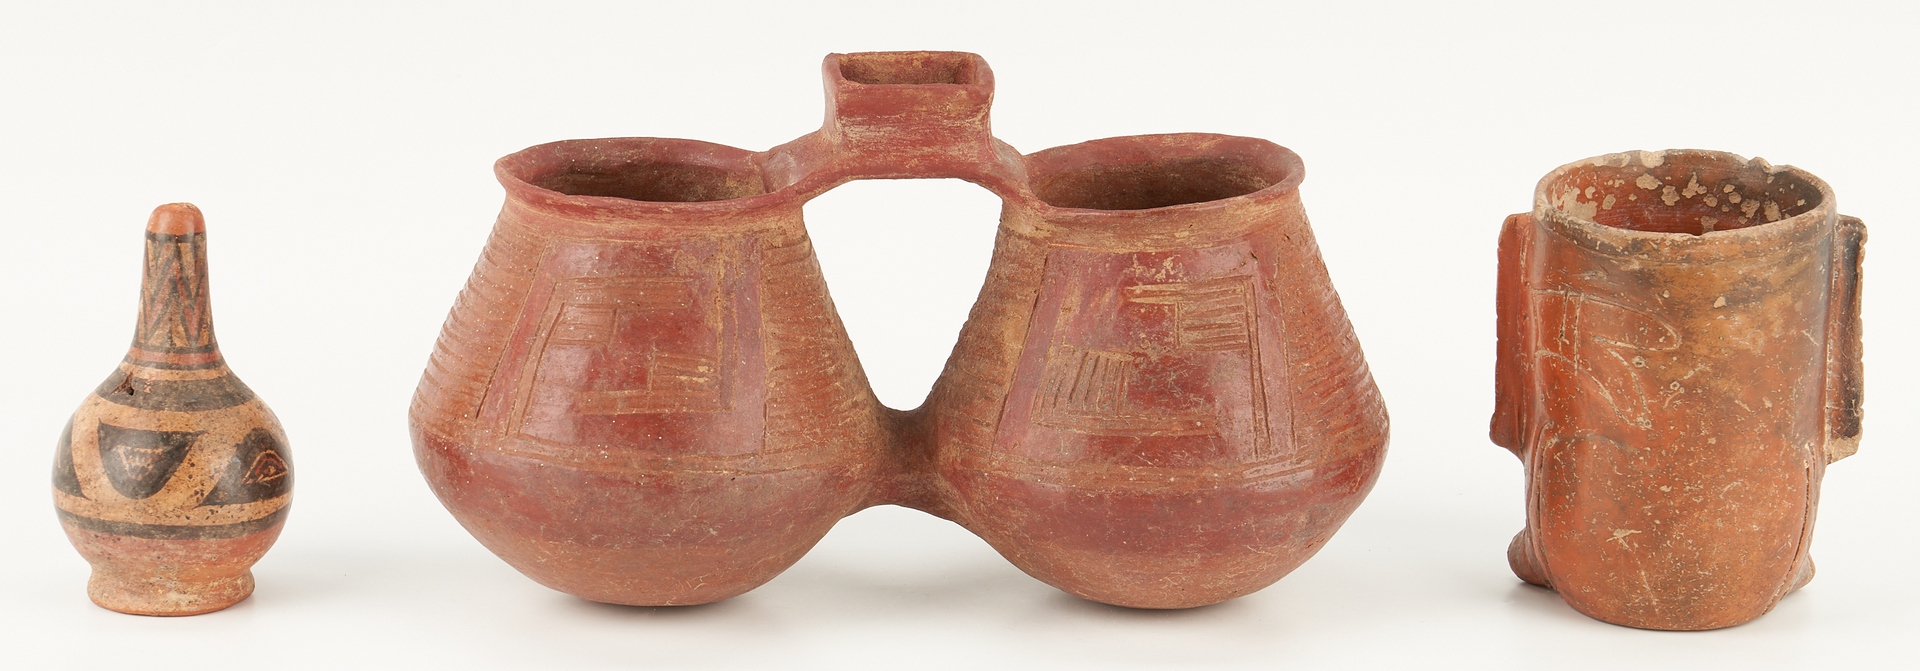 Lot 693: 5 Panamanian Cocle Pottery Items, incl. Animal Effigy